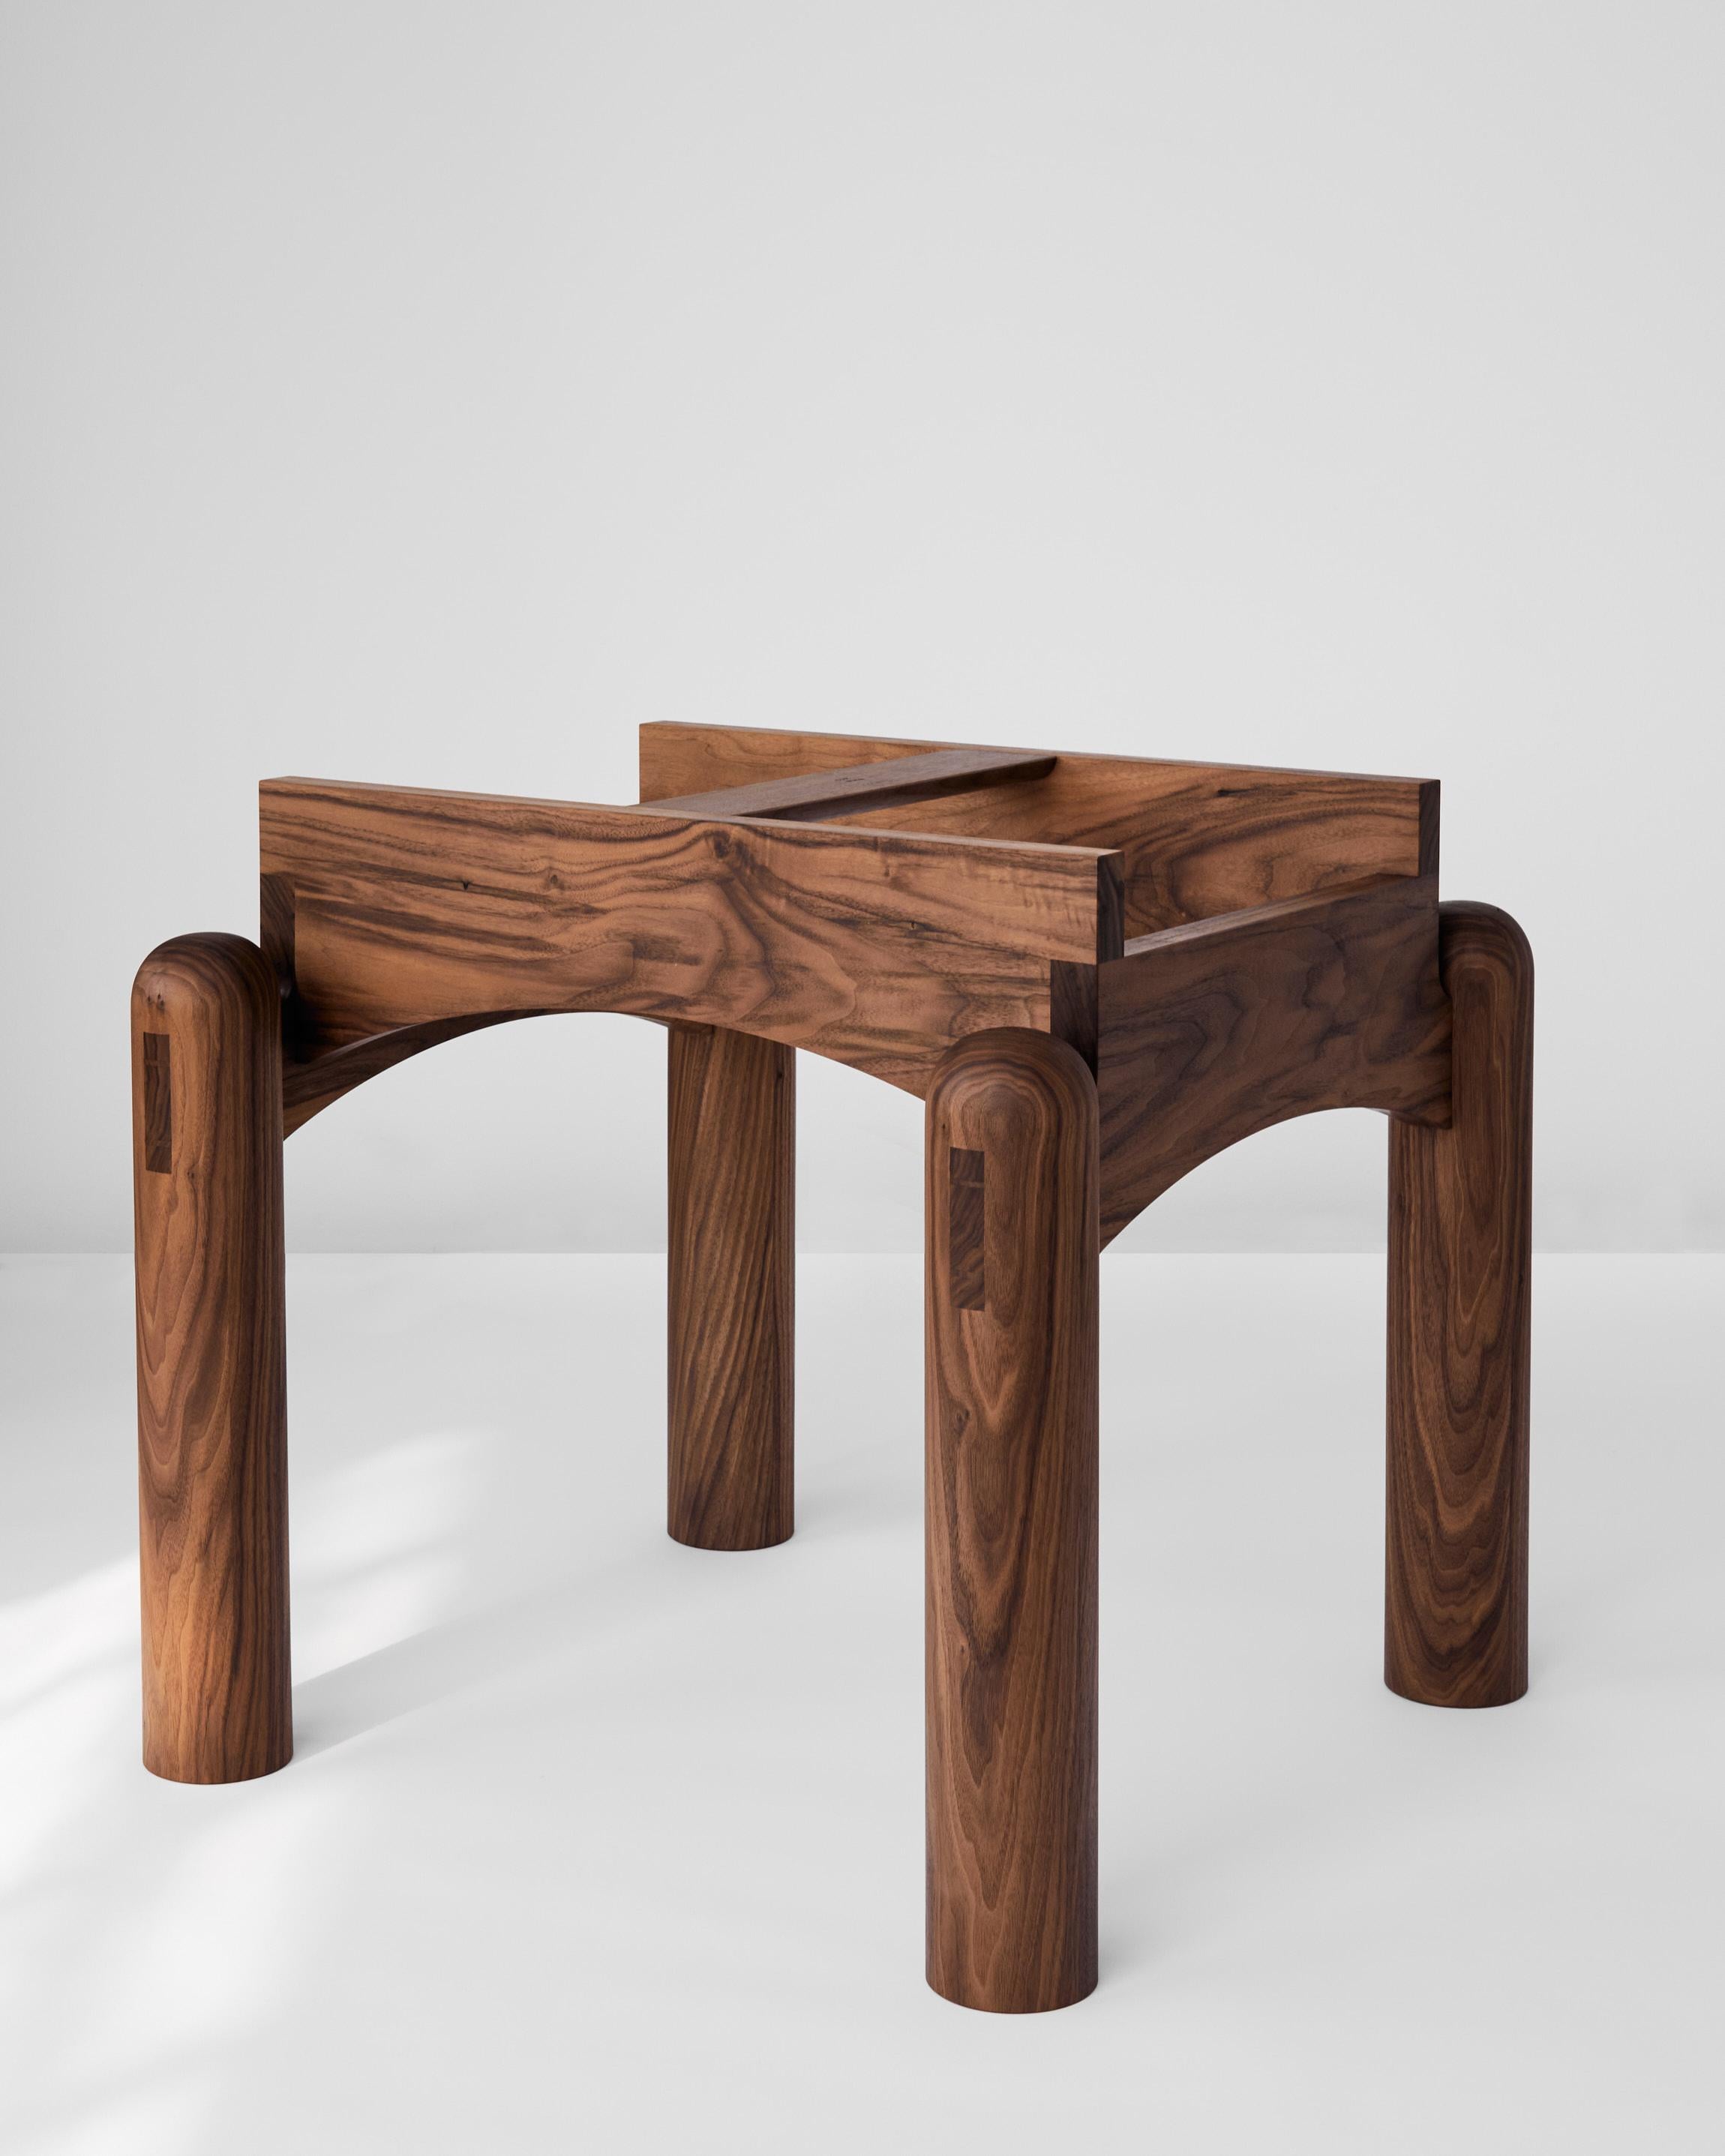 Lacquered Handmade Nora Dining Table, Fixed Ø150cm - Walnut - by BACD studio For Sale